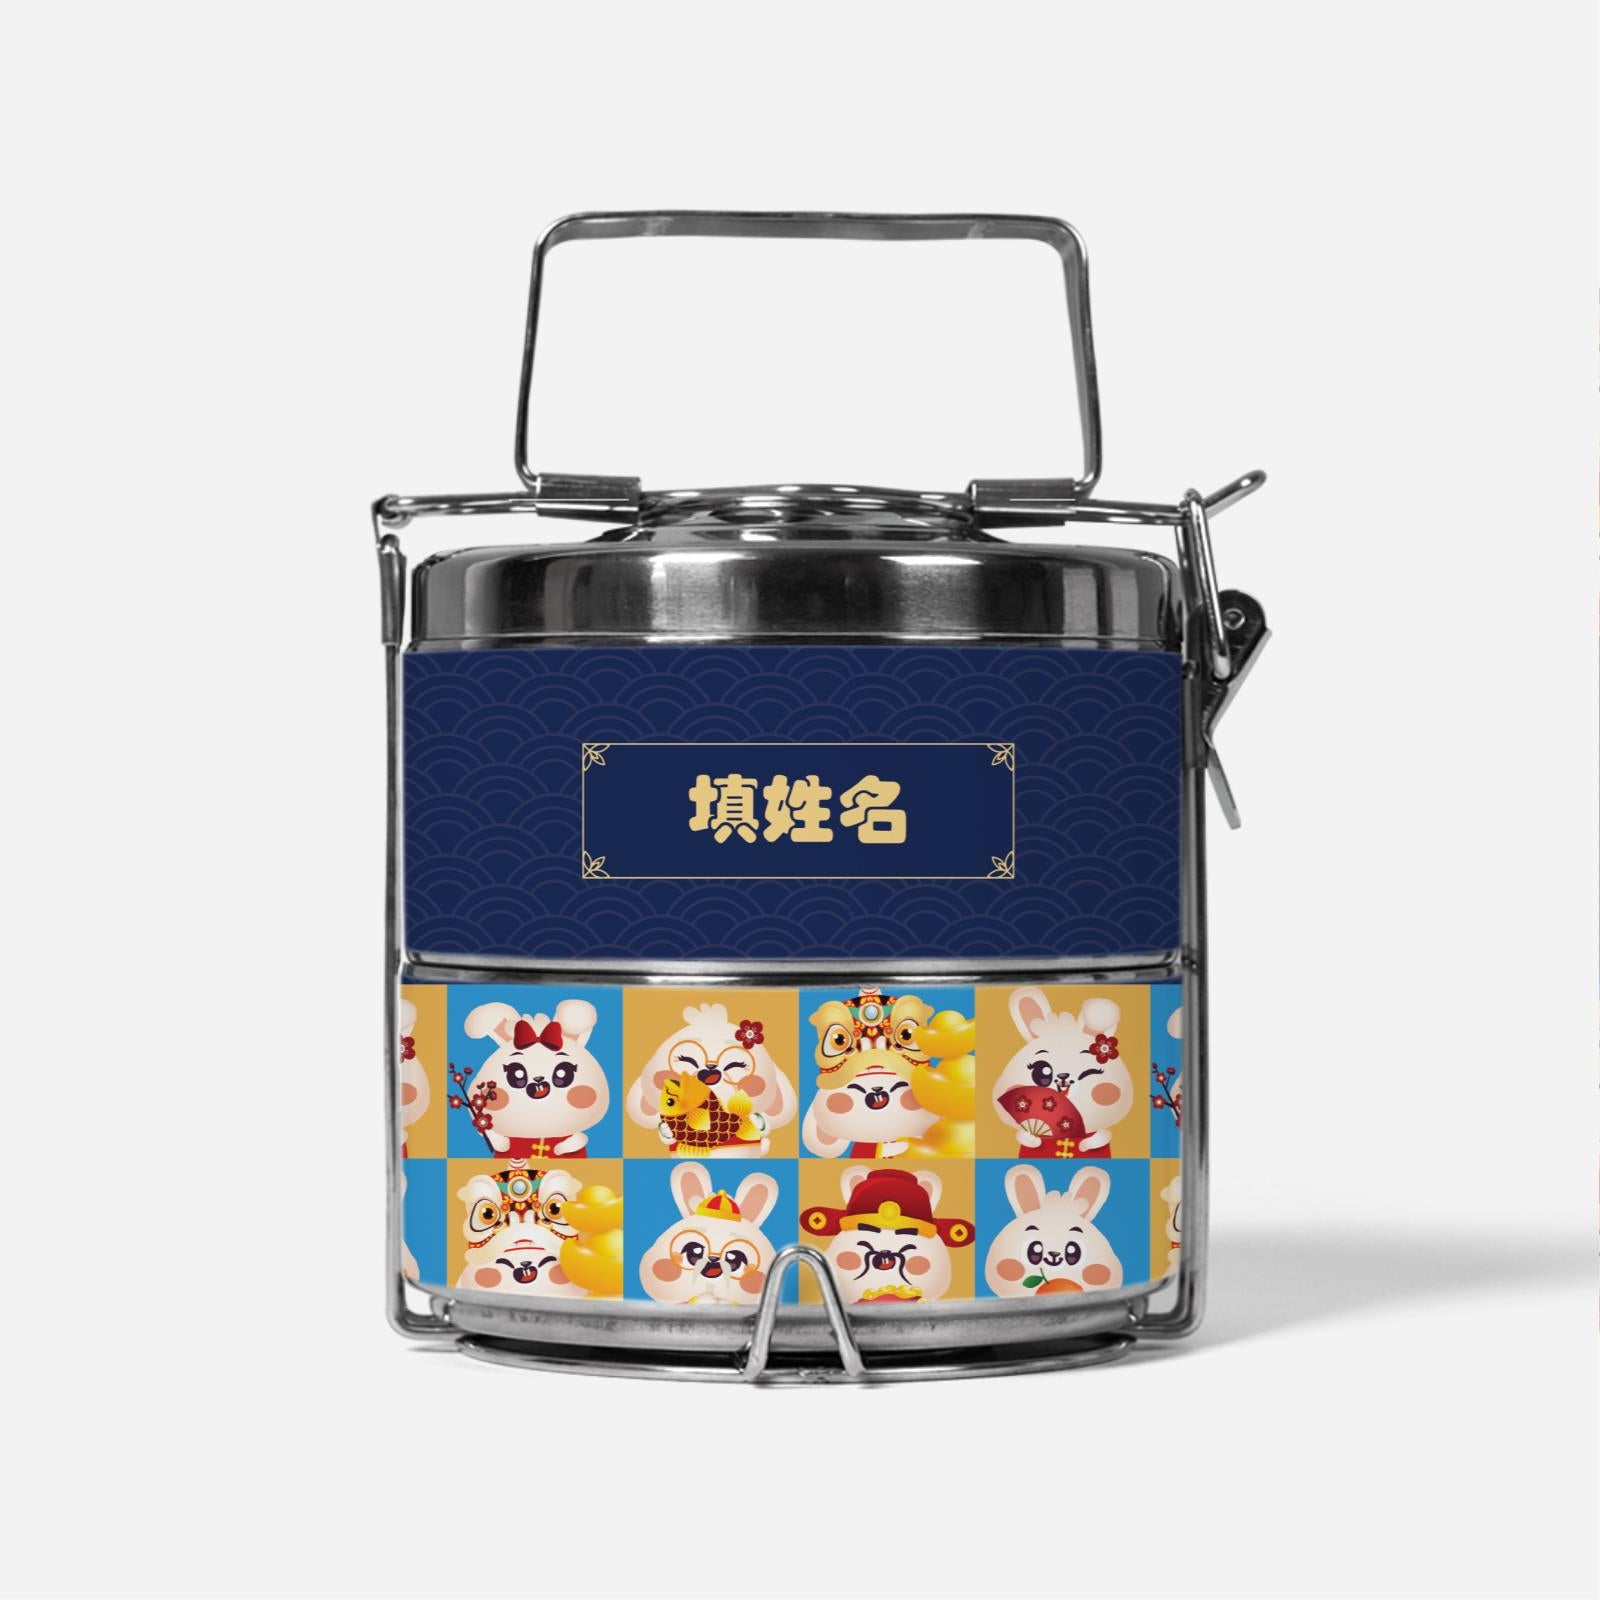 Cny Rabbit Family - Rabbit Family Blue Two-Tier Premium Tififn Carrier With Chinese Personalization